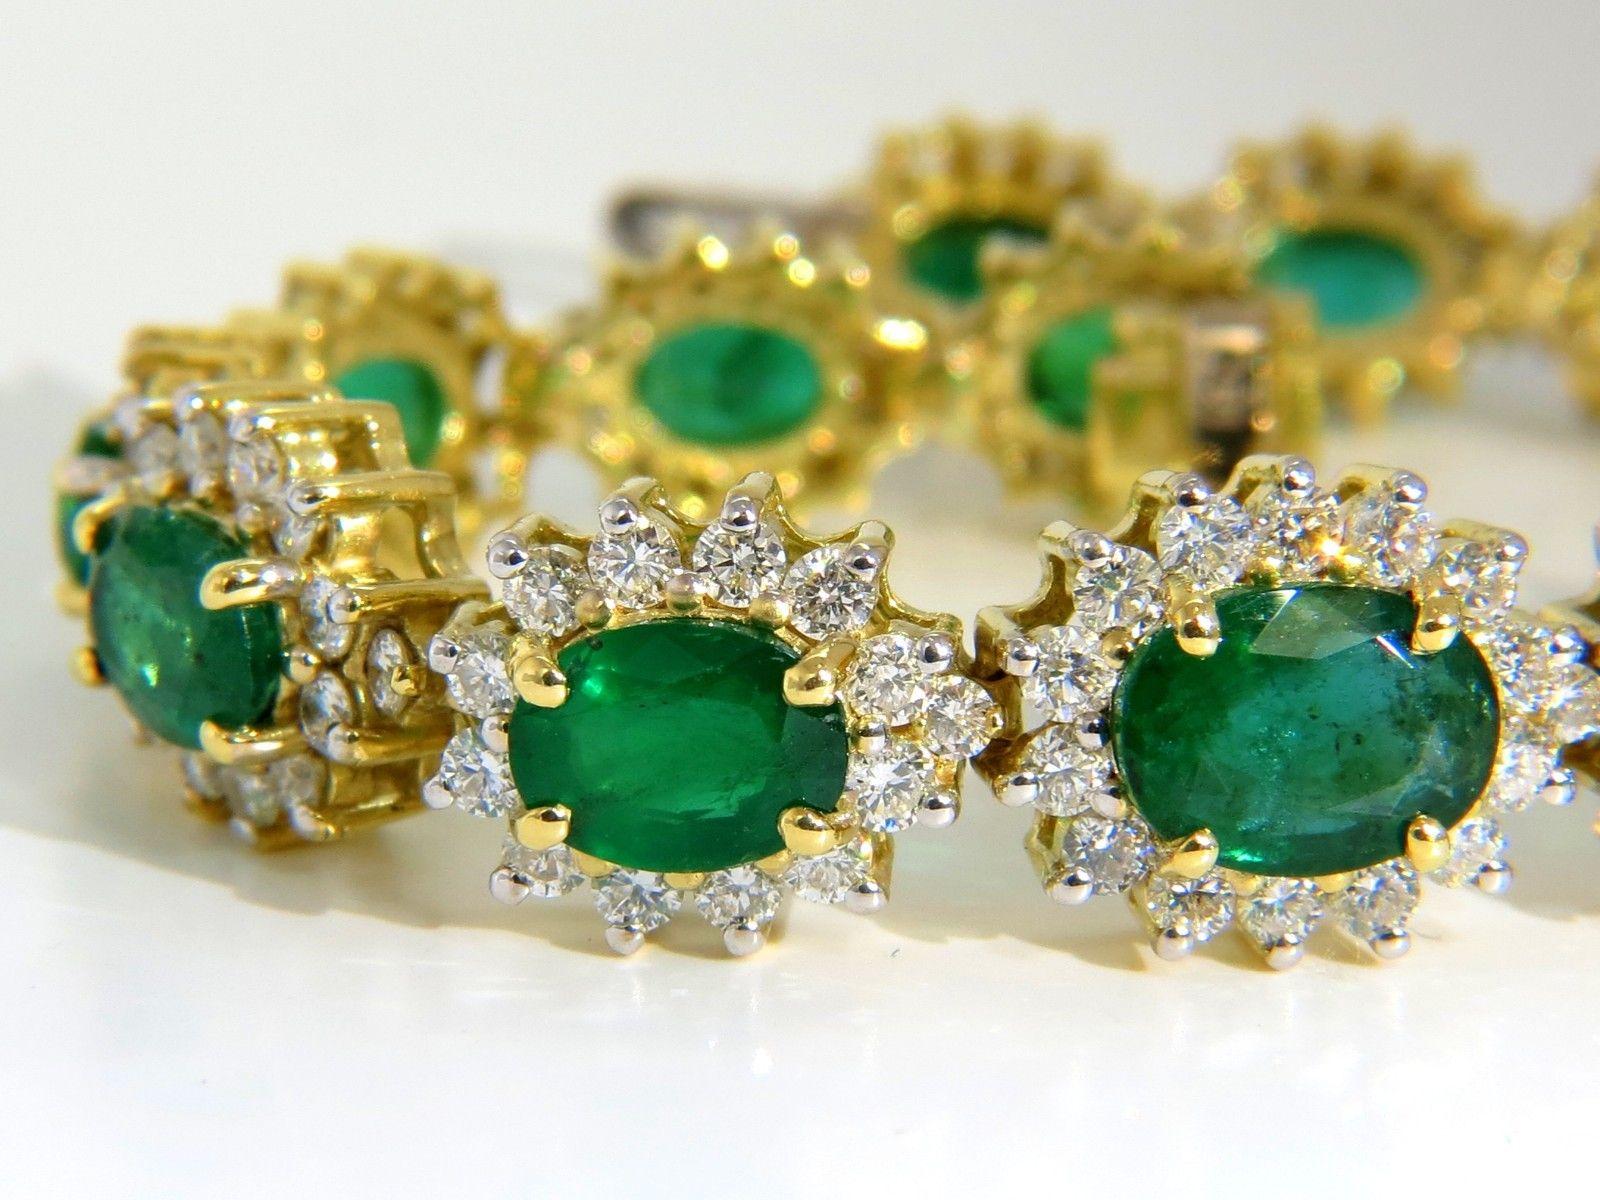 15.00ct. Ladies Emerald Diamond Cluster halo bracelet.

Emeralds, Natural & selected from the finest parcels.

The vivid Zambian Greens with clean clarity and transparent.

Graduated from 9.1 X 6.9mm (larger in center)

to 6.1 X4.2mm (at end, on